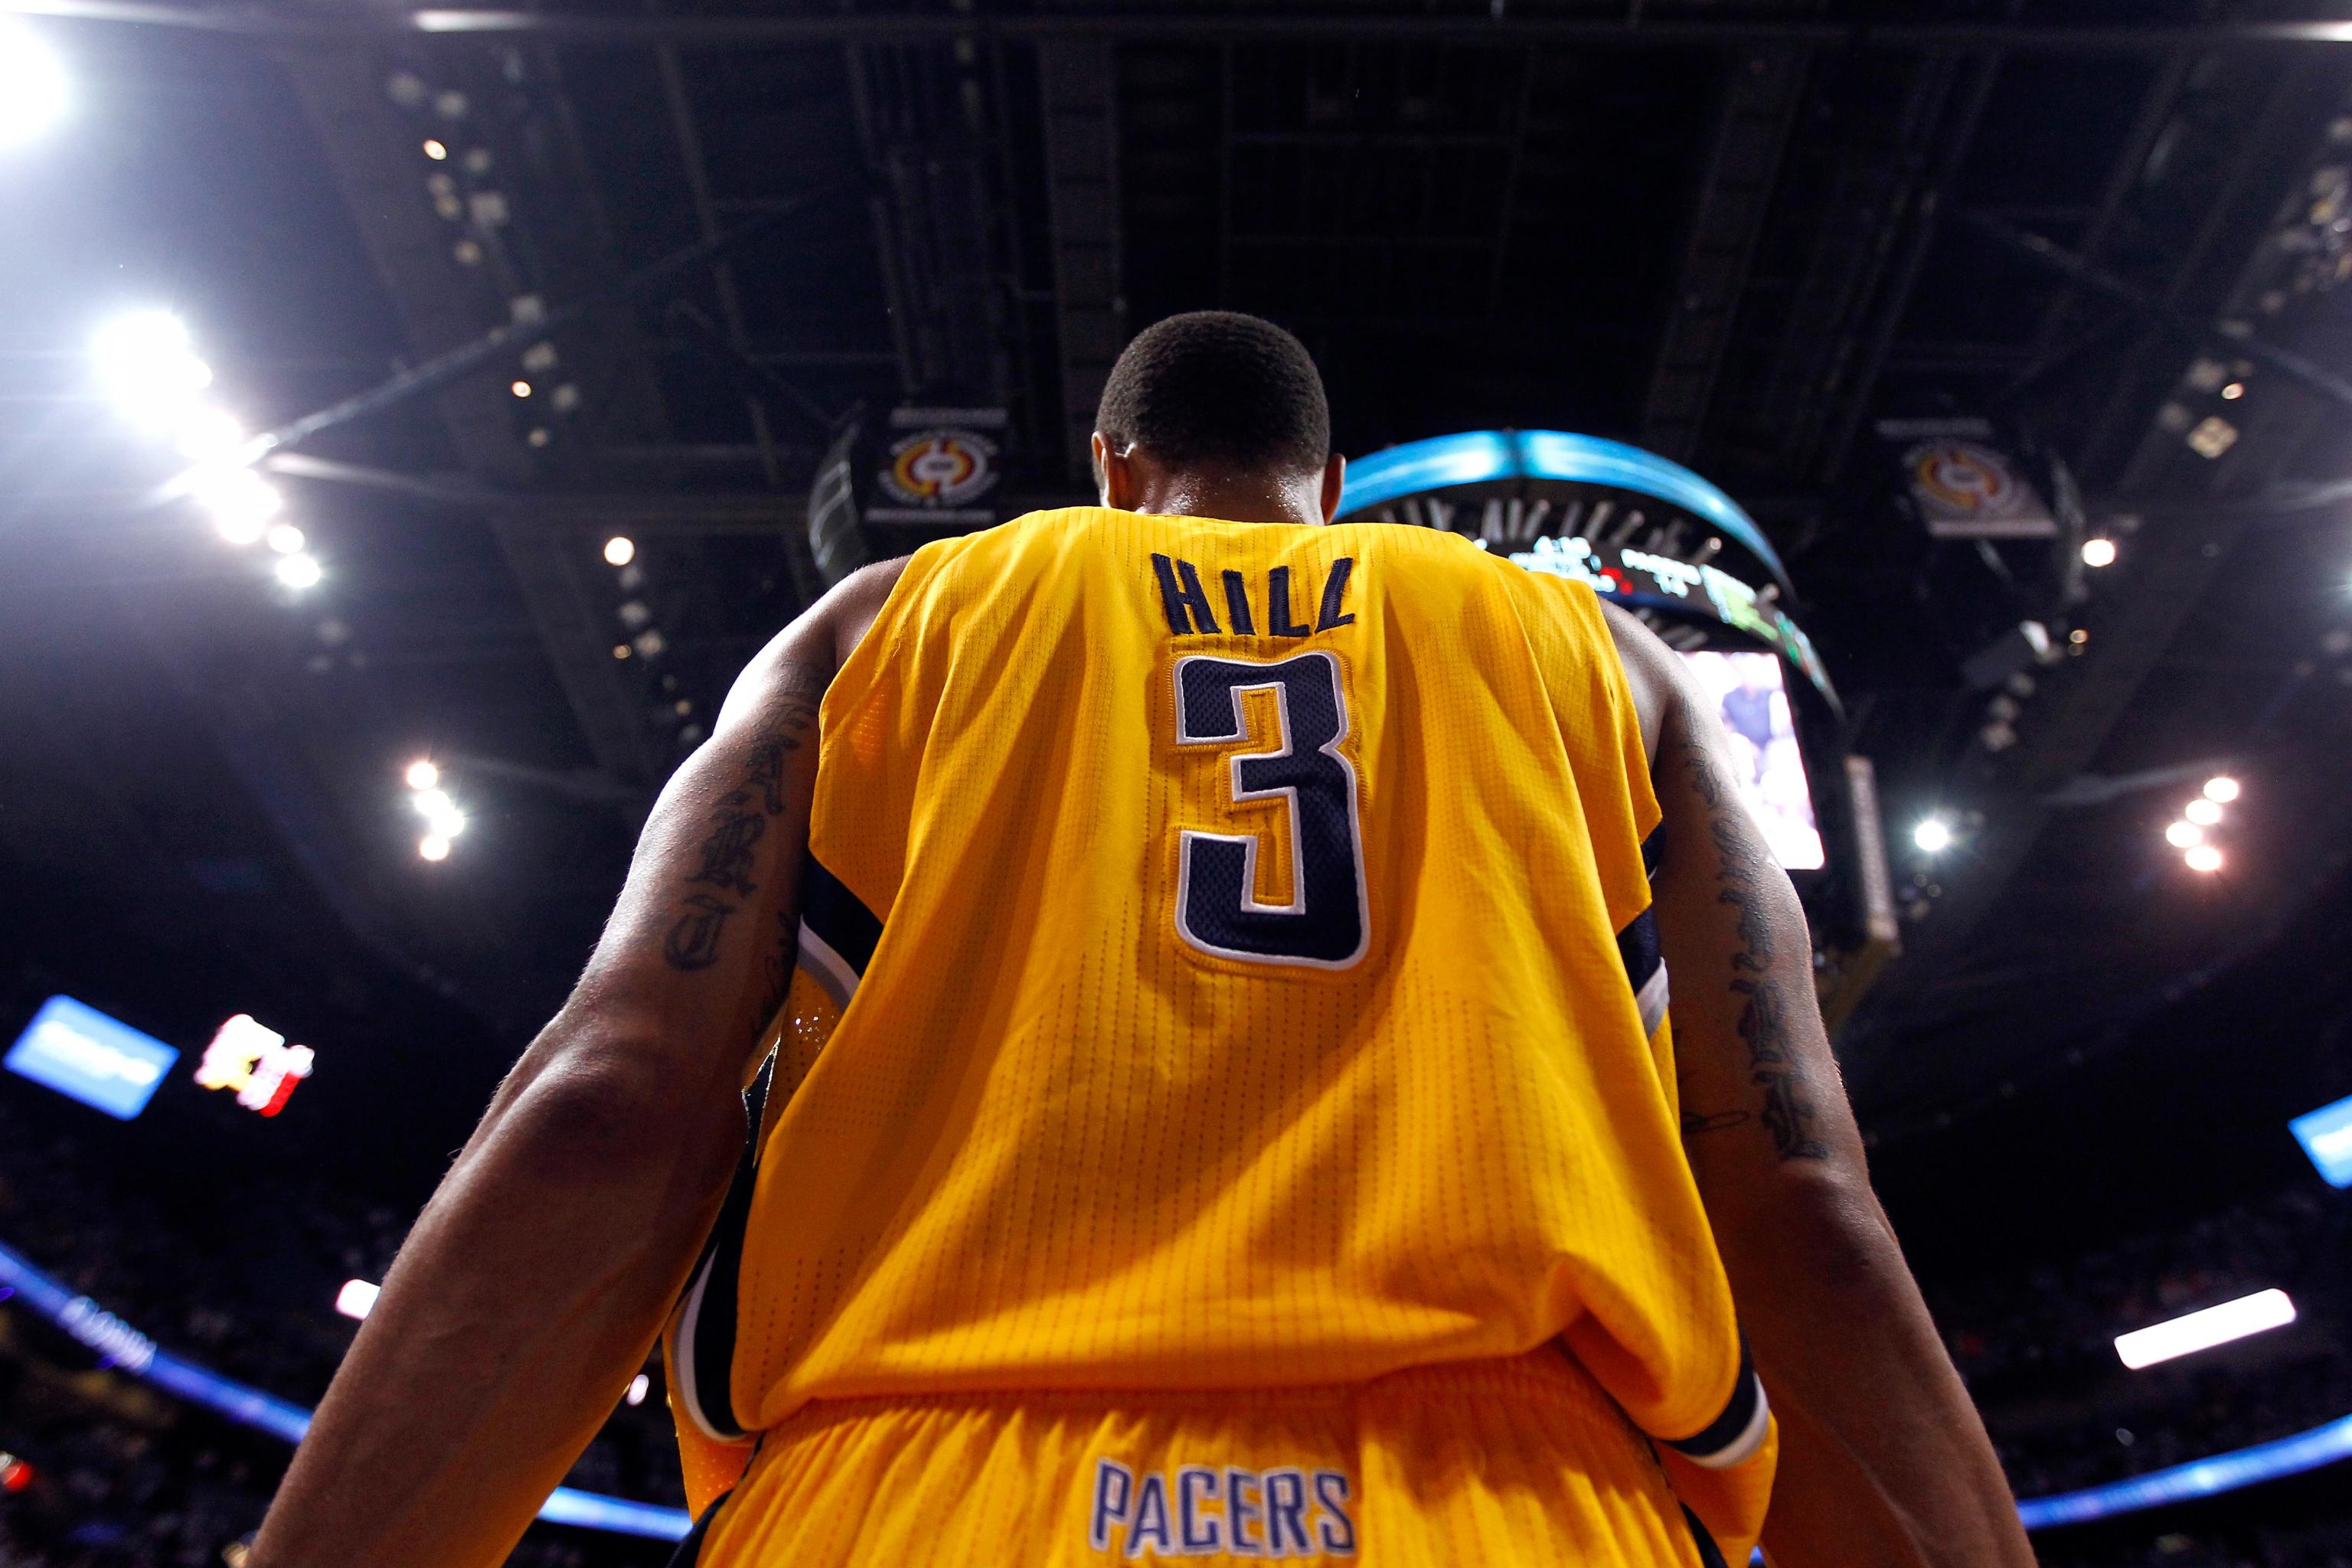 George Hill, Indiana Pacers